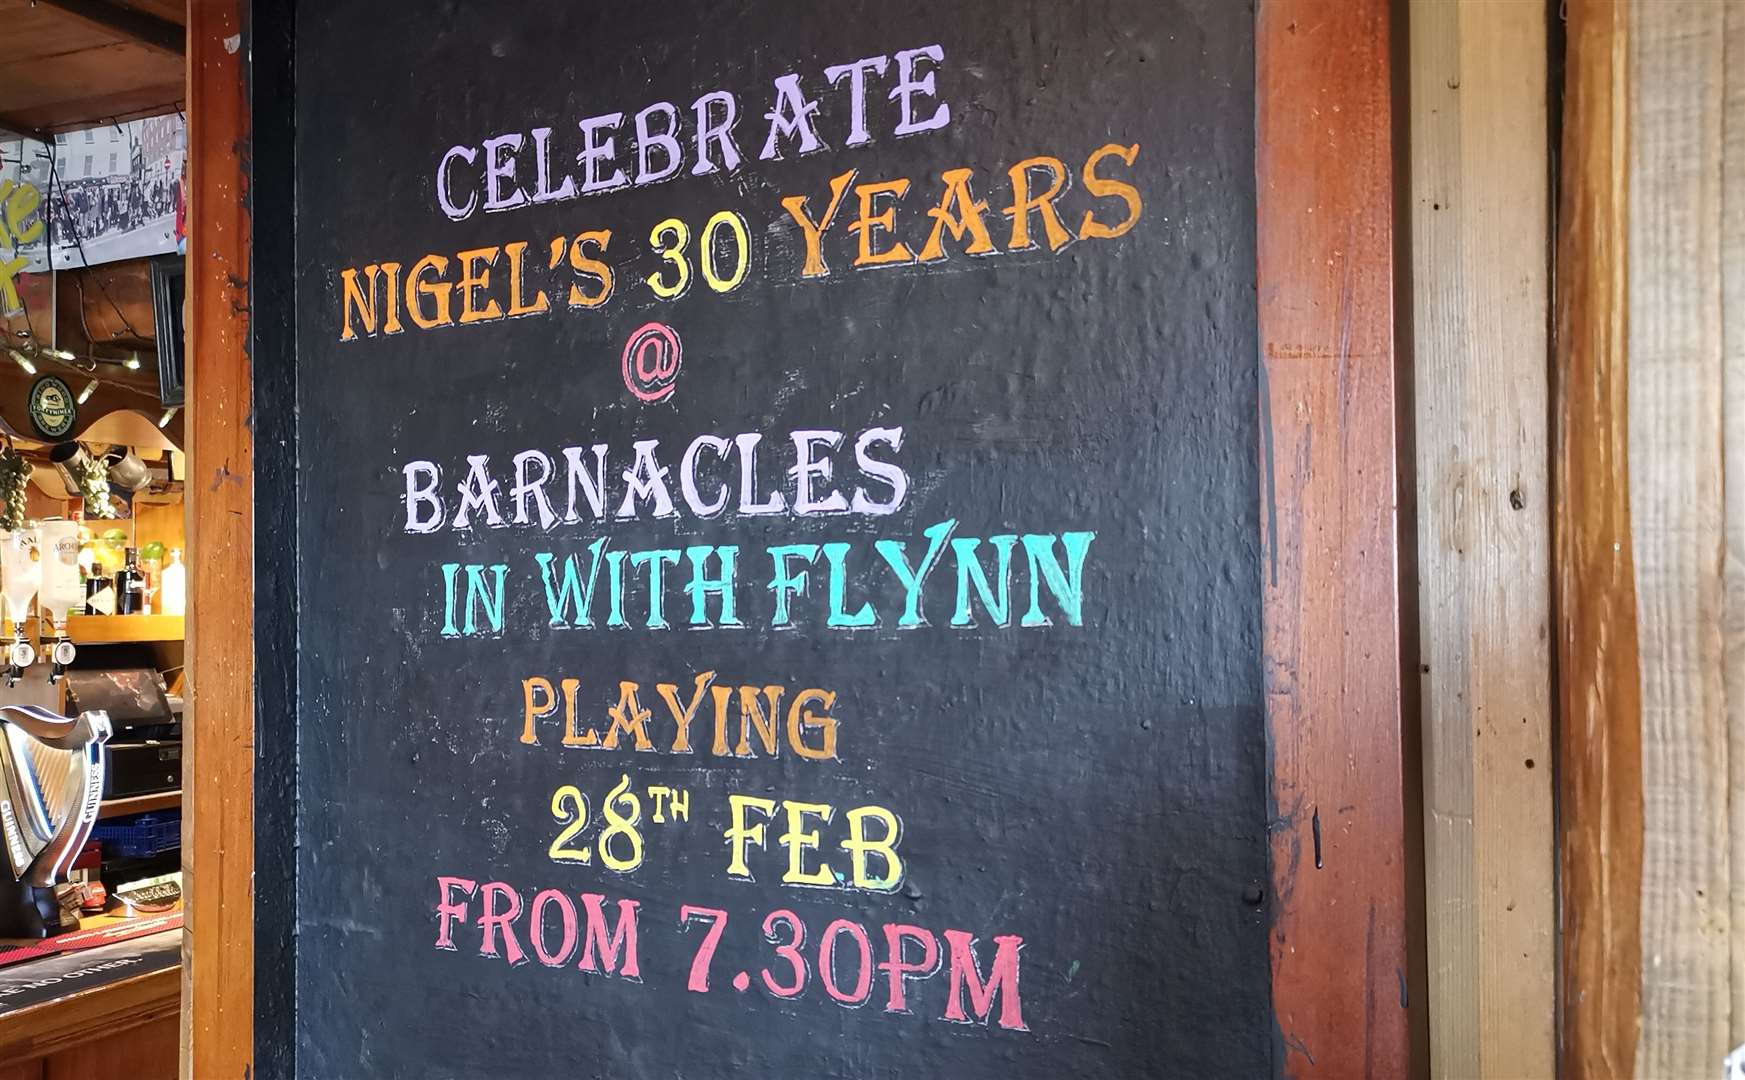 The pub will celebrate with a special night on February 28